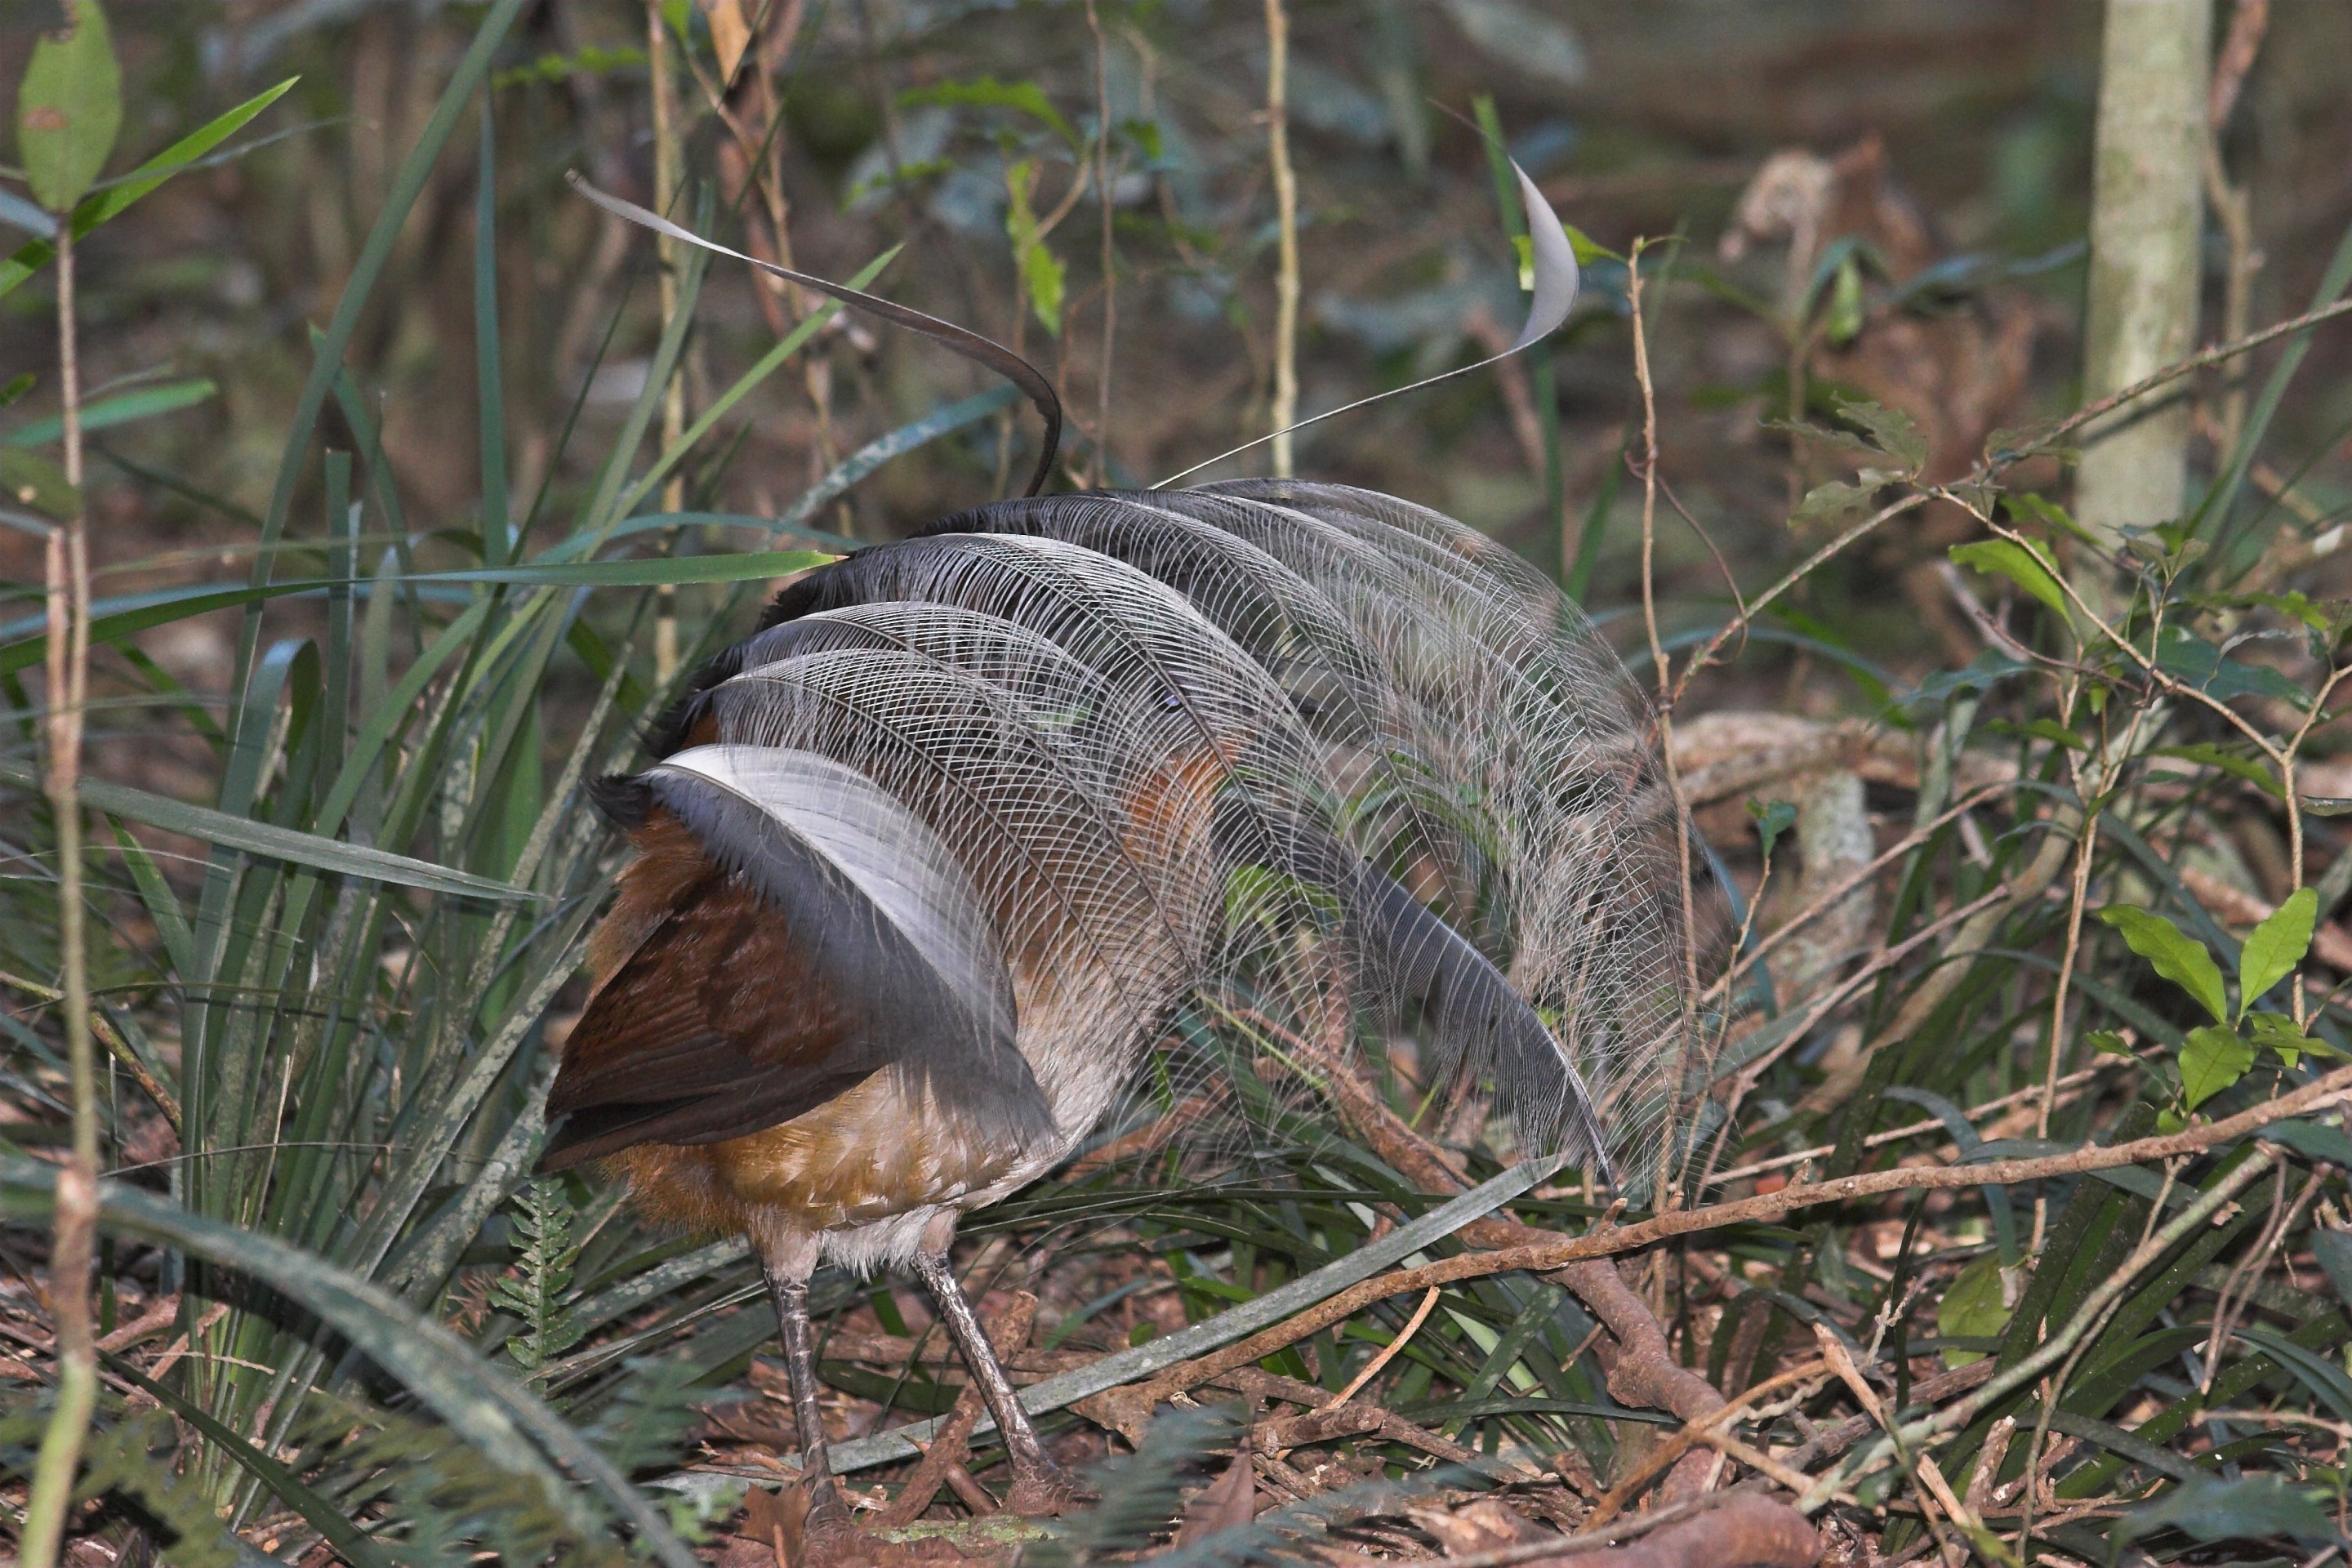 A male albert's lyrebird, which is a brown bird, with its extravagant tail feathers flipped over his head